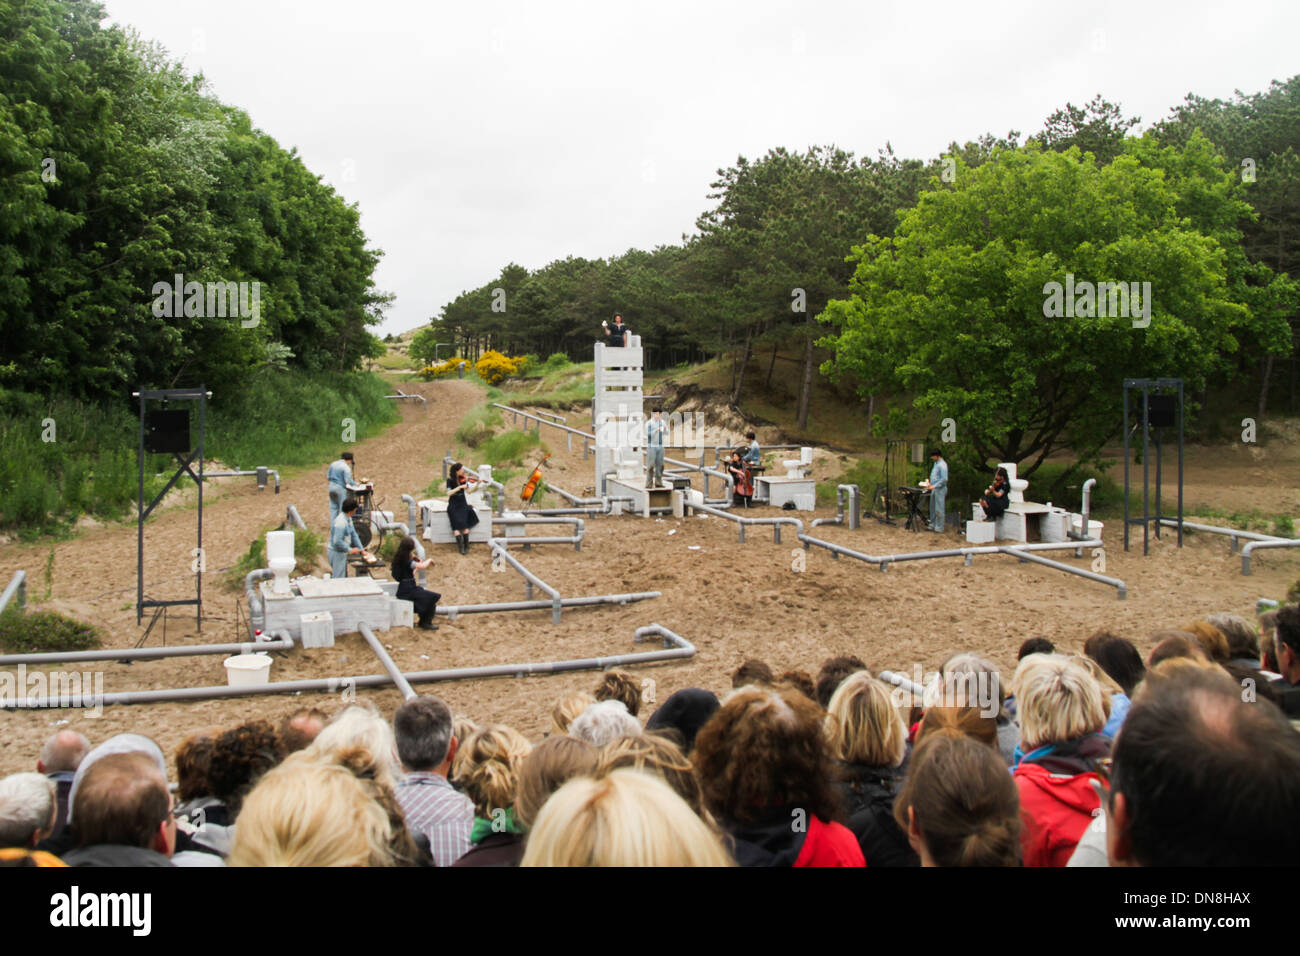 An outdoor theatrical performance at Oerol Festival Terschelling Island The Netherlands Stock Photo